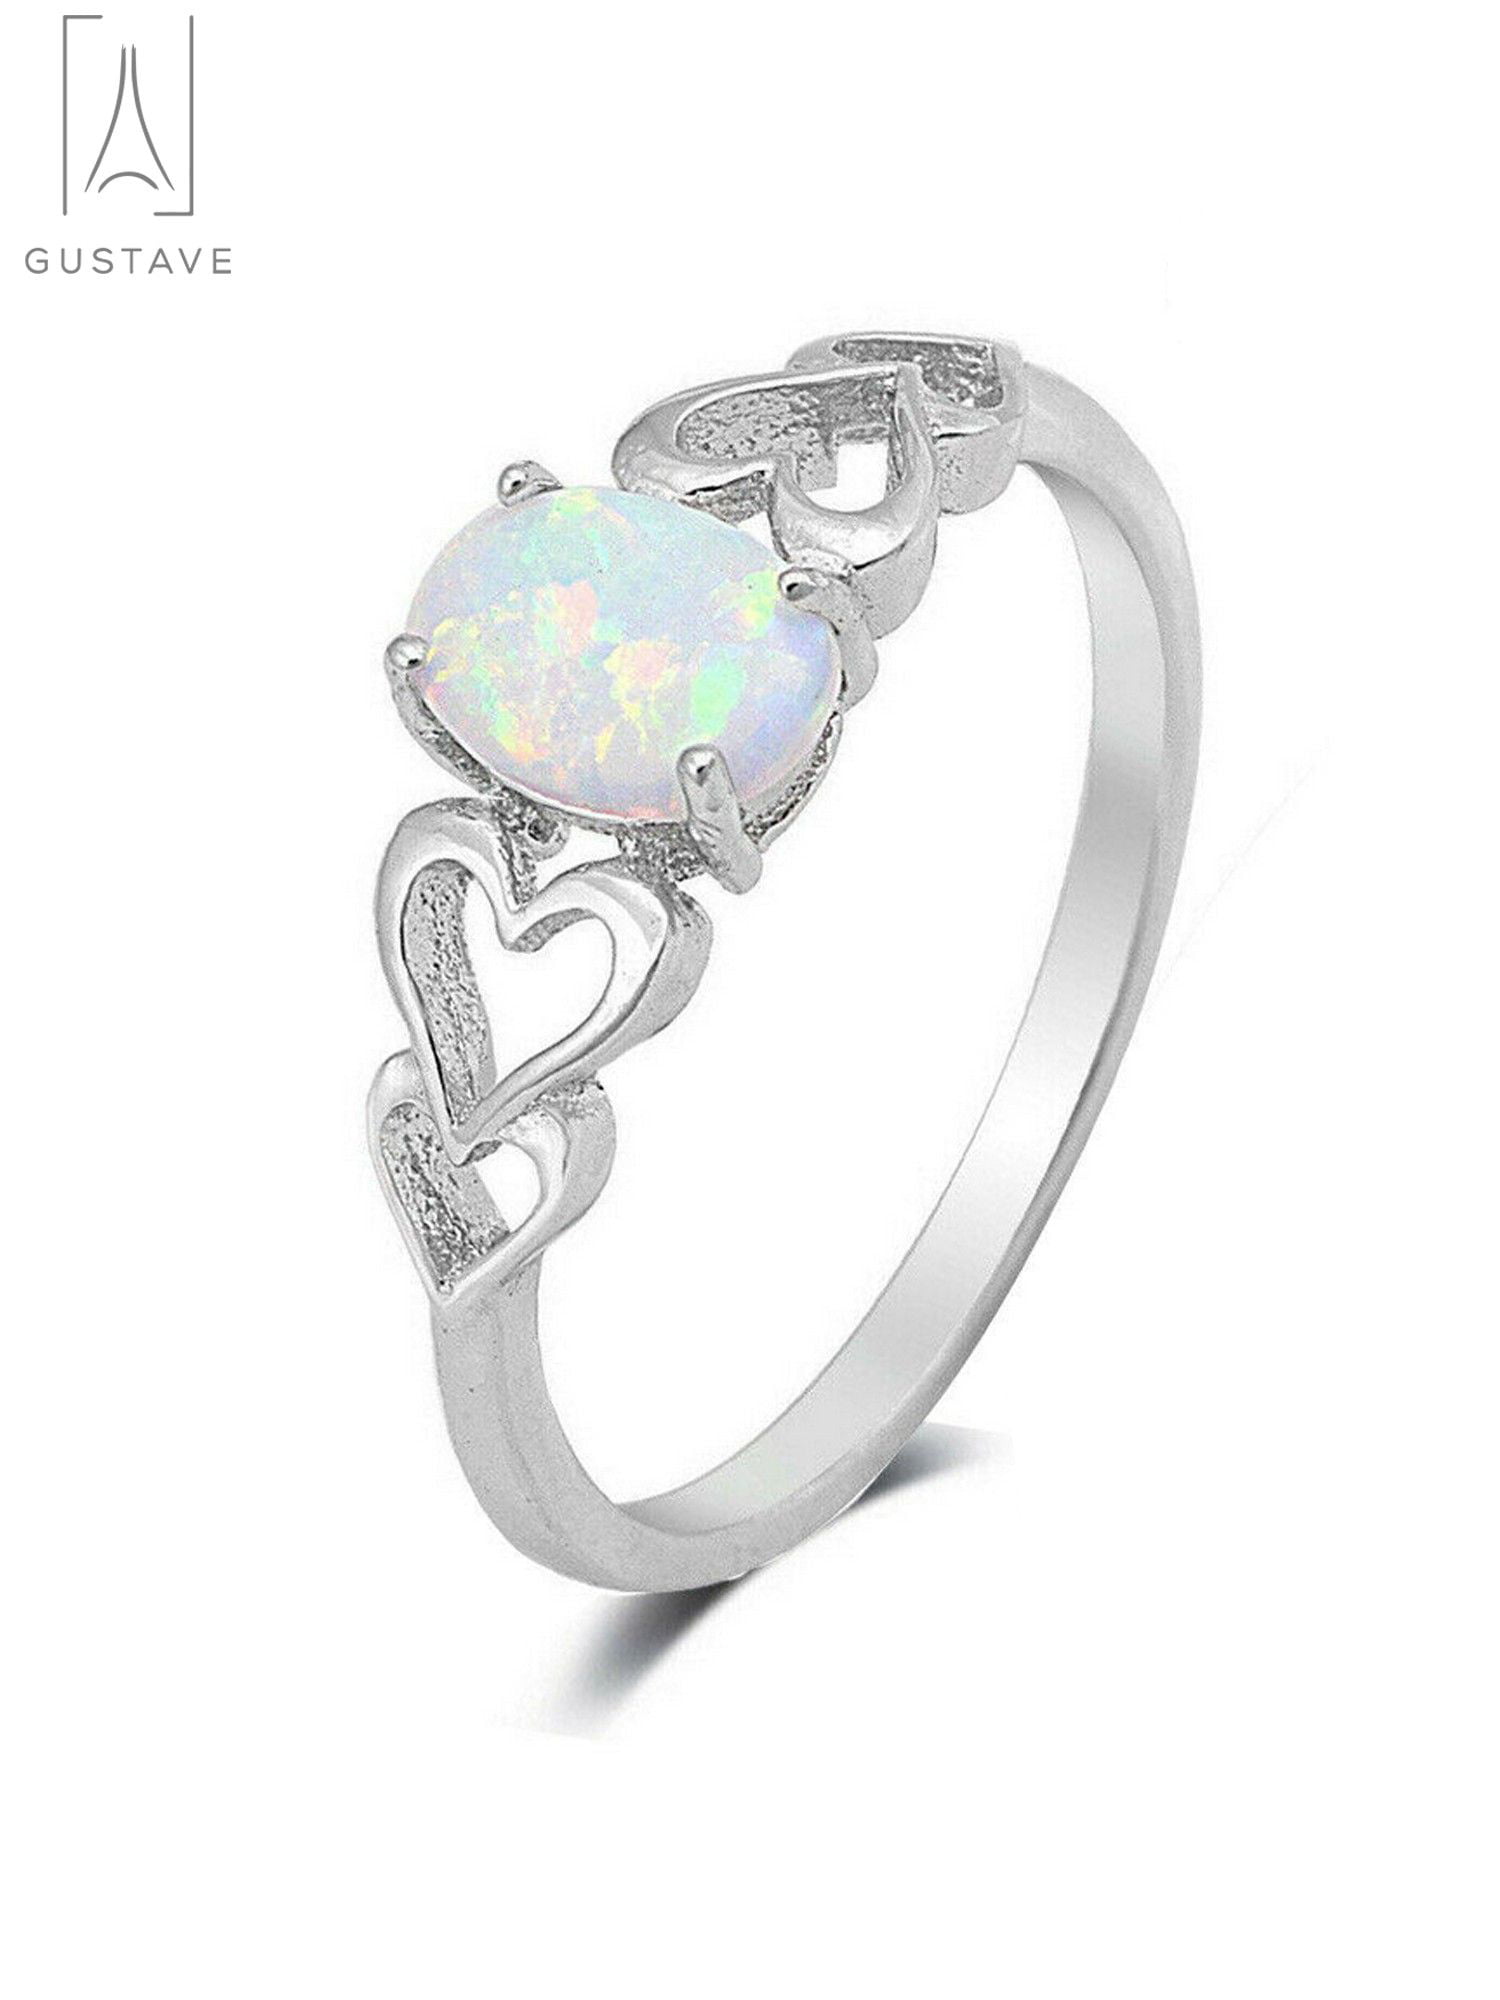 White Fire Opal Inlay Solid 925 Sterling Silver Band Ring size 7-8 